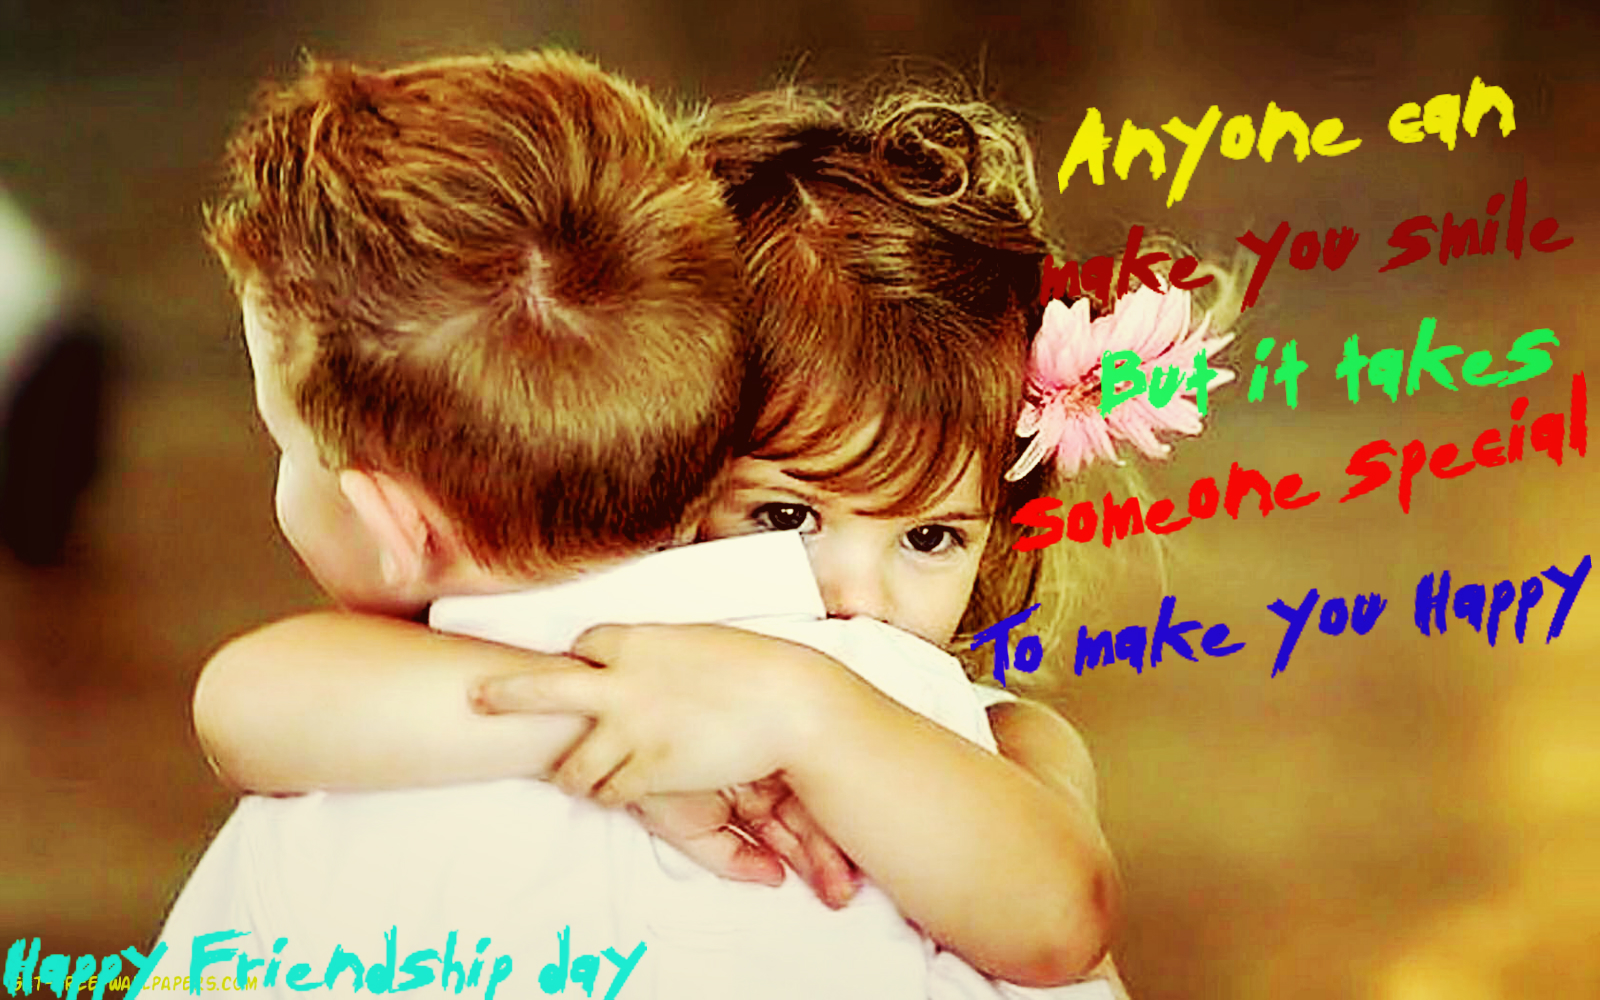 friendship wallpapers with messages,love,romance,friendship,hug,happy